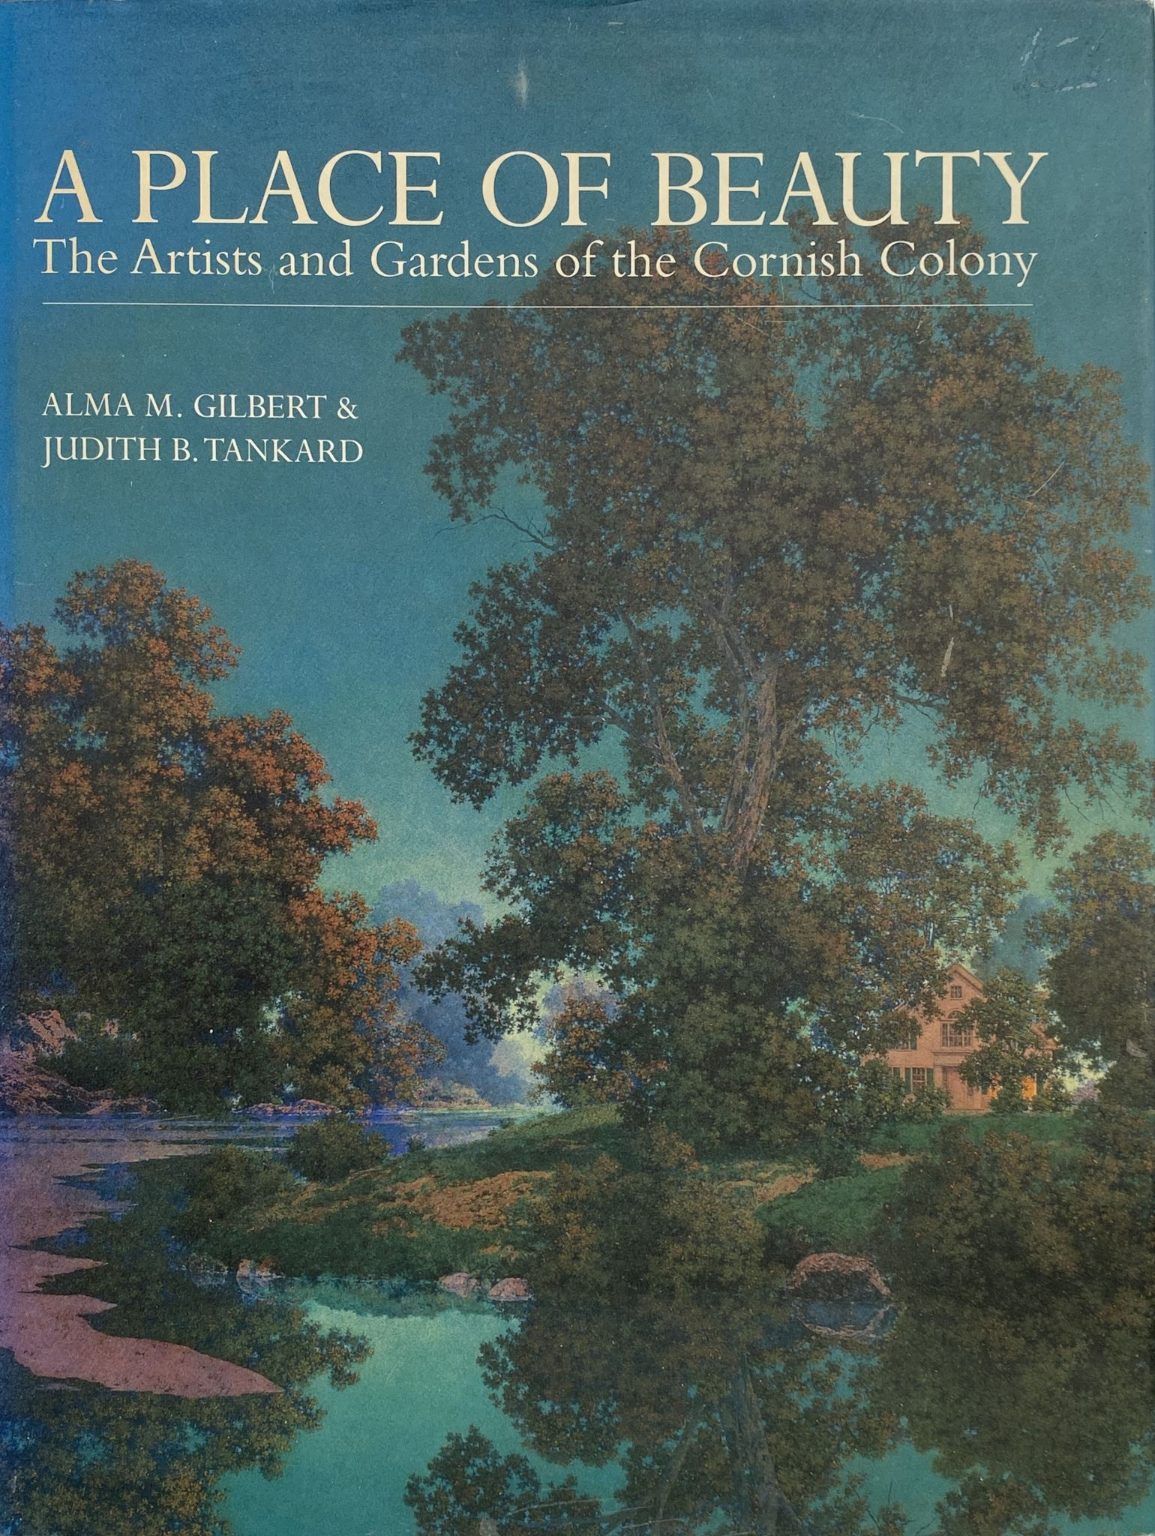 A PLACE OF BEAUTY: The Artists and Gardens of The Cornish Colony